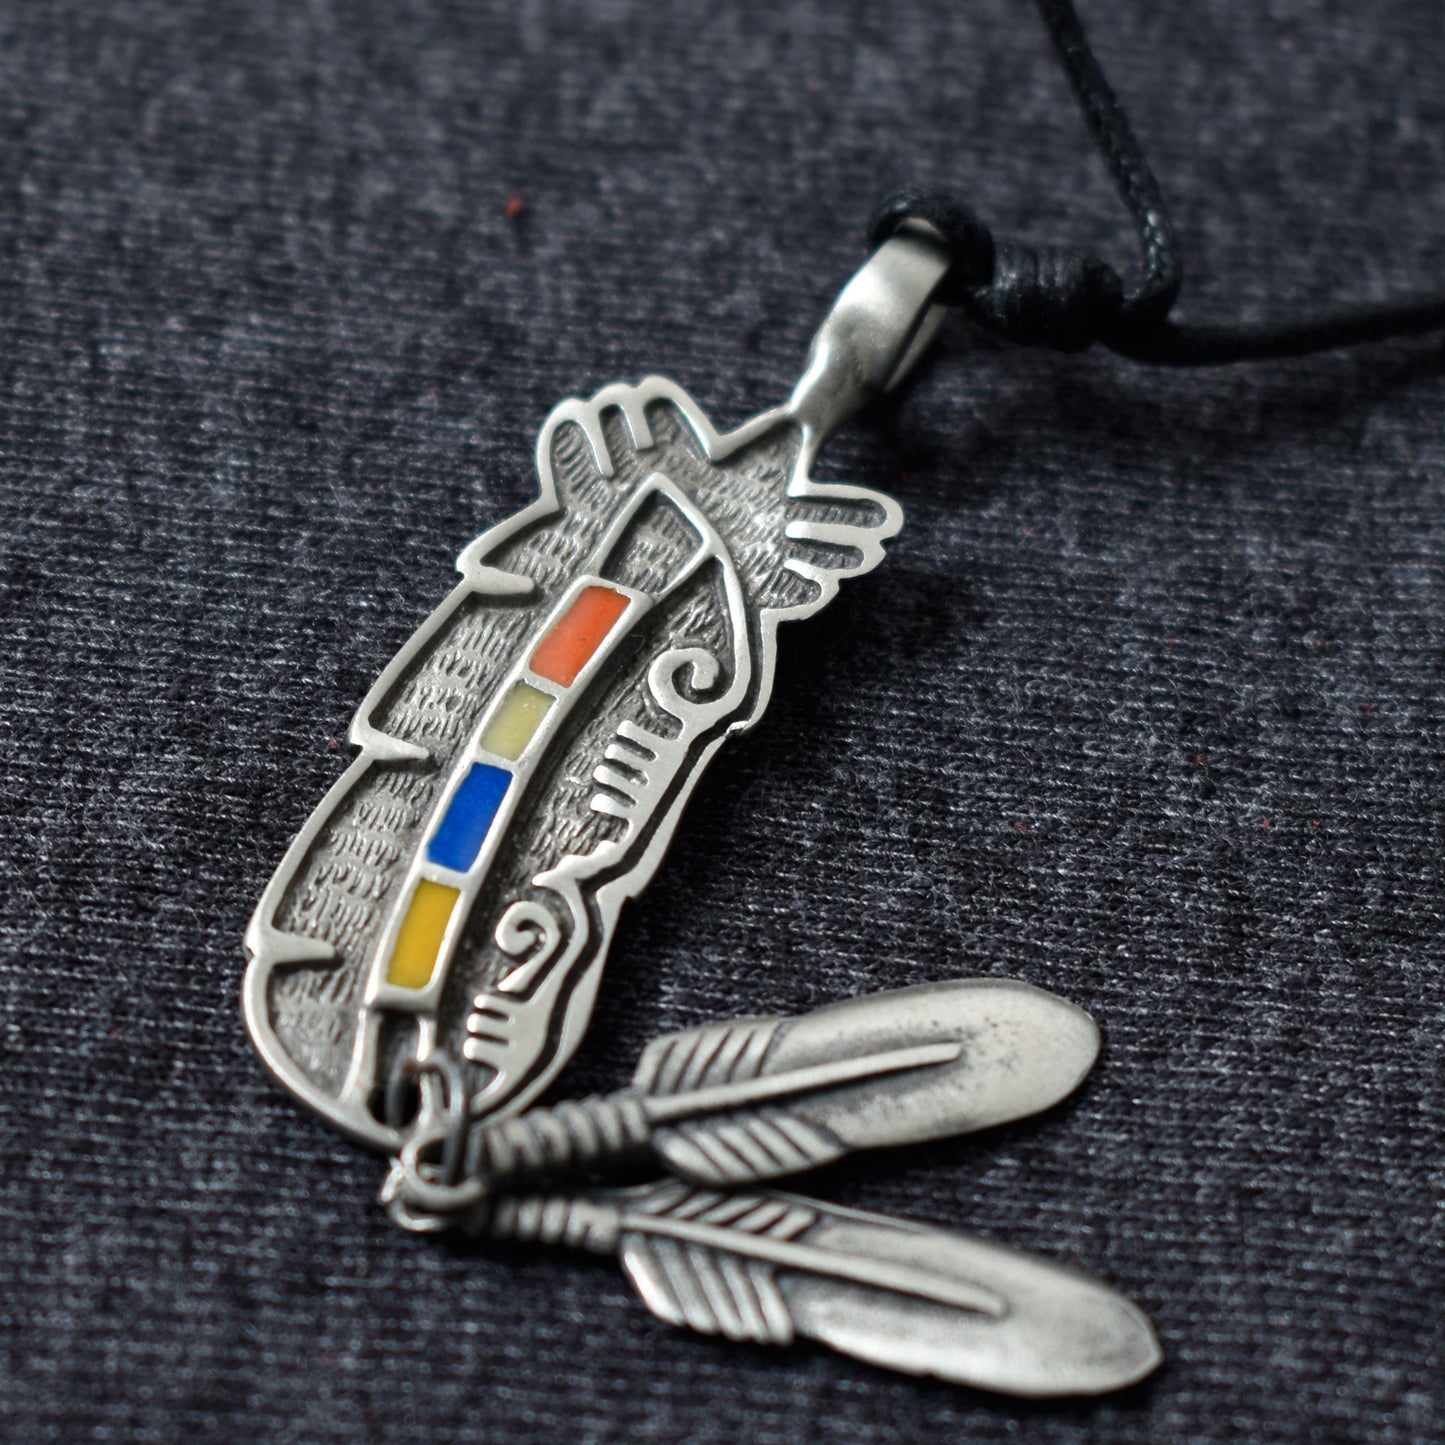 Native American Indian Silver Pewter Charm Necklace Pendant Jewelry